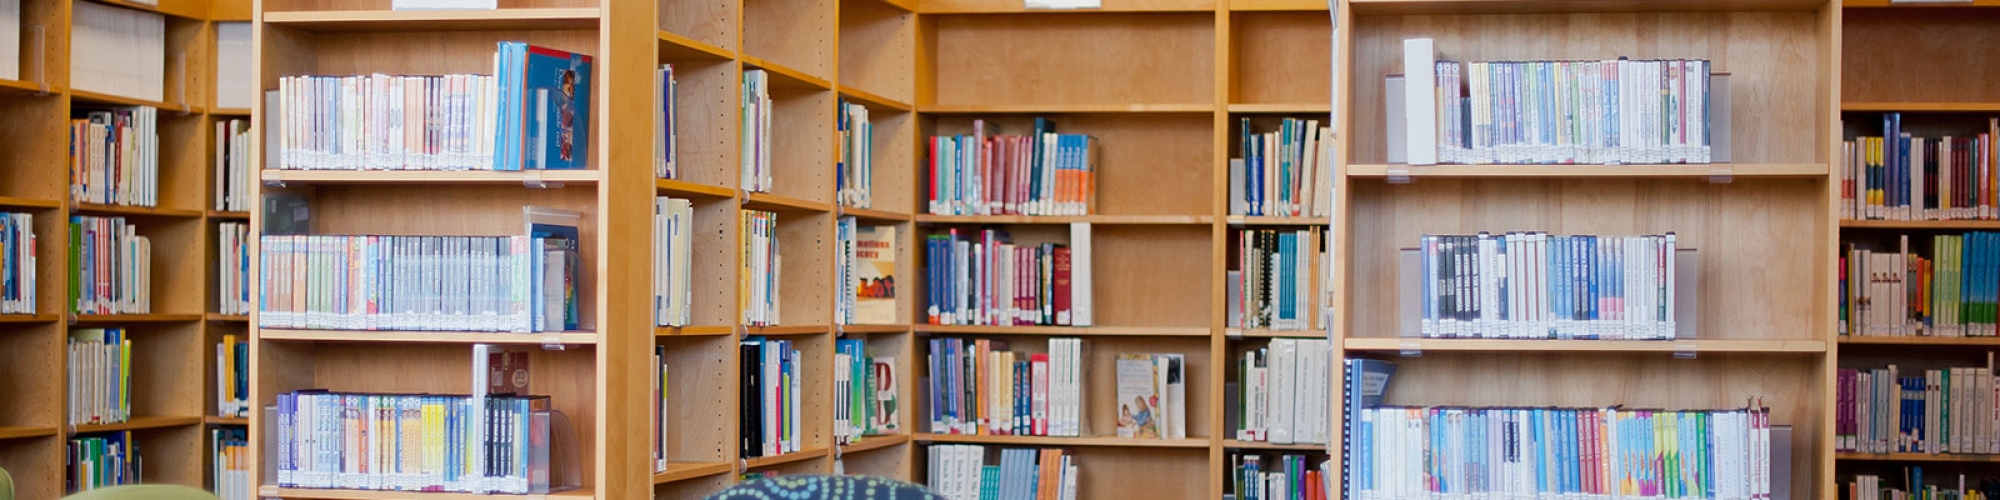 Photo of library shelves